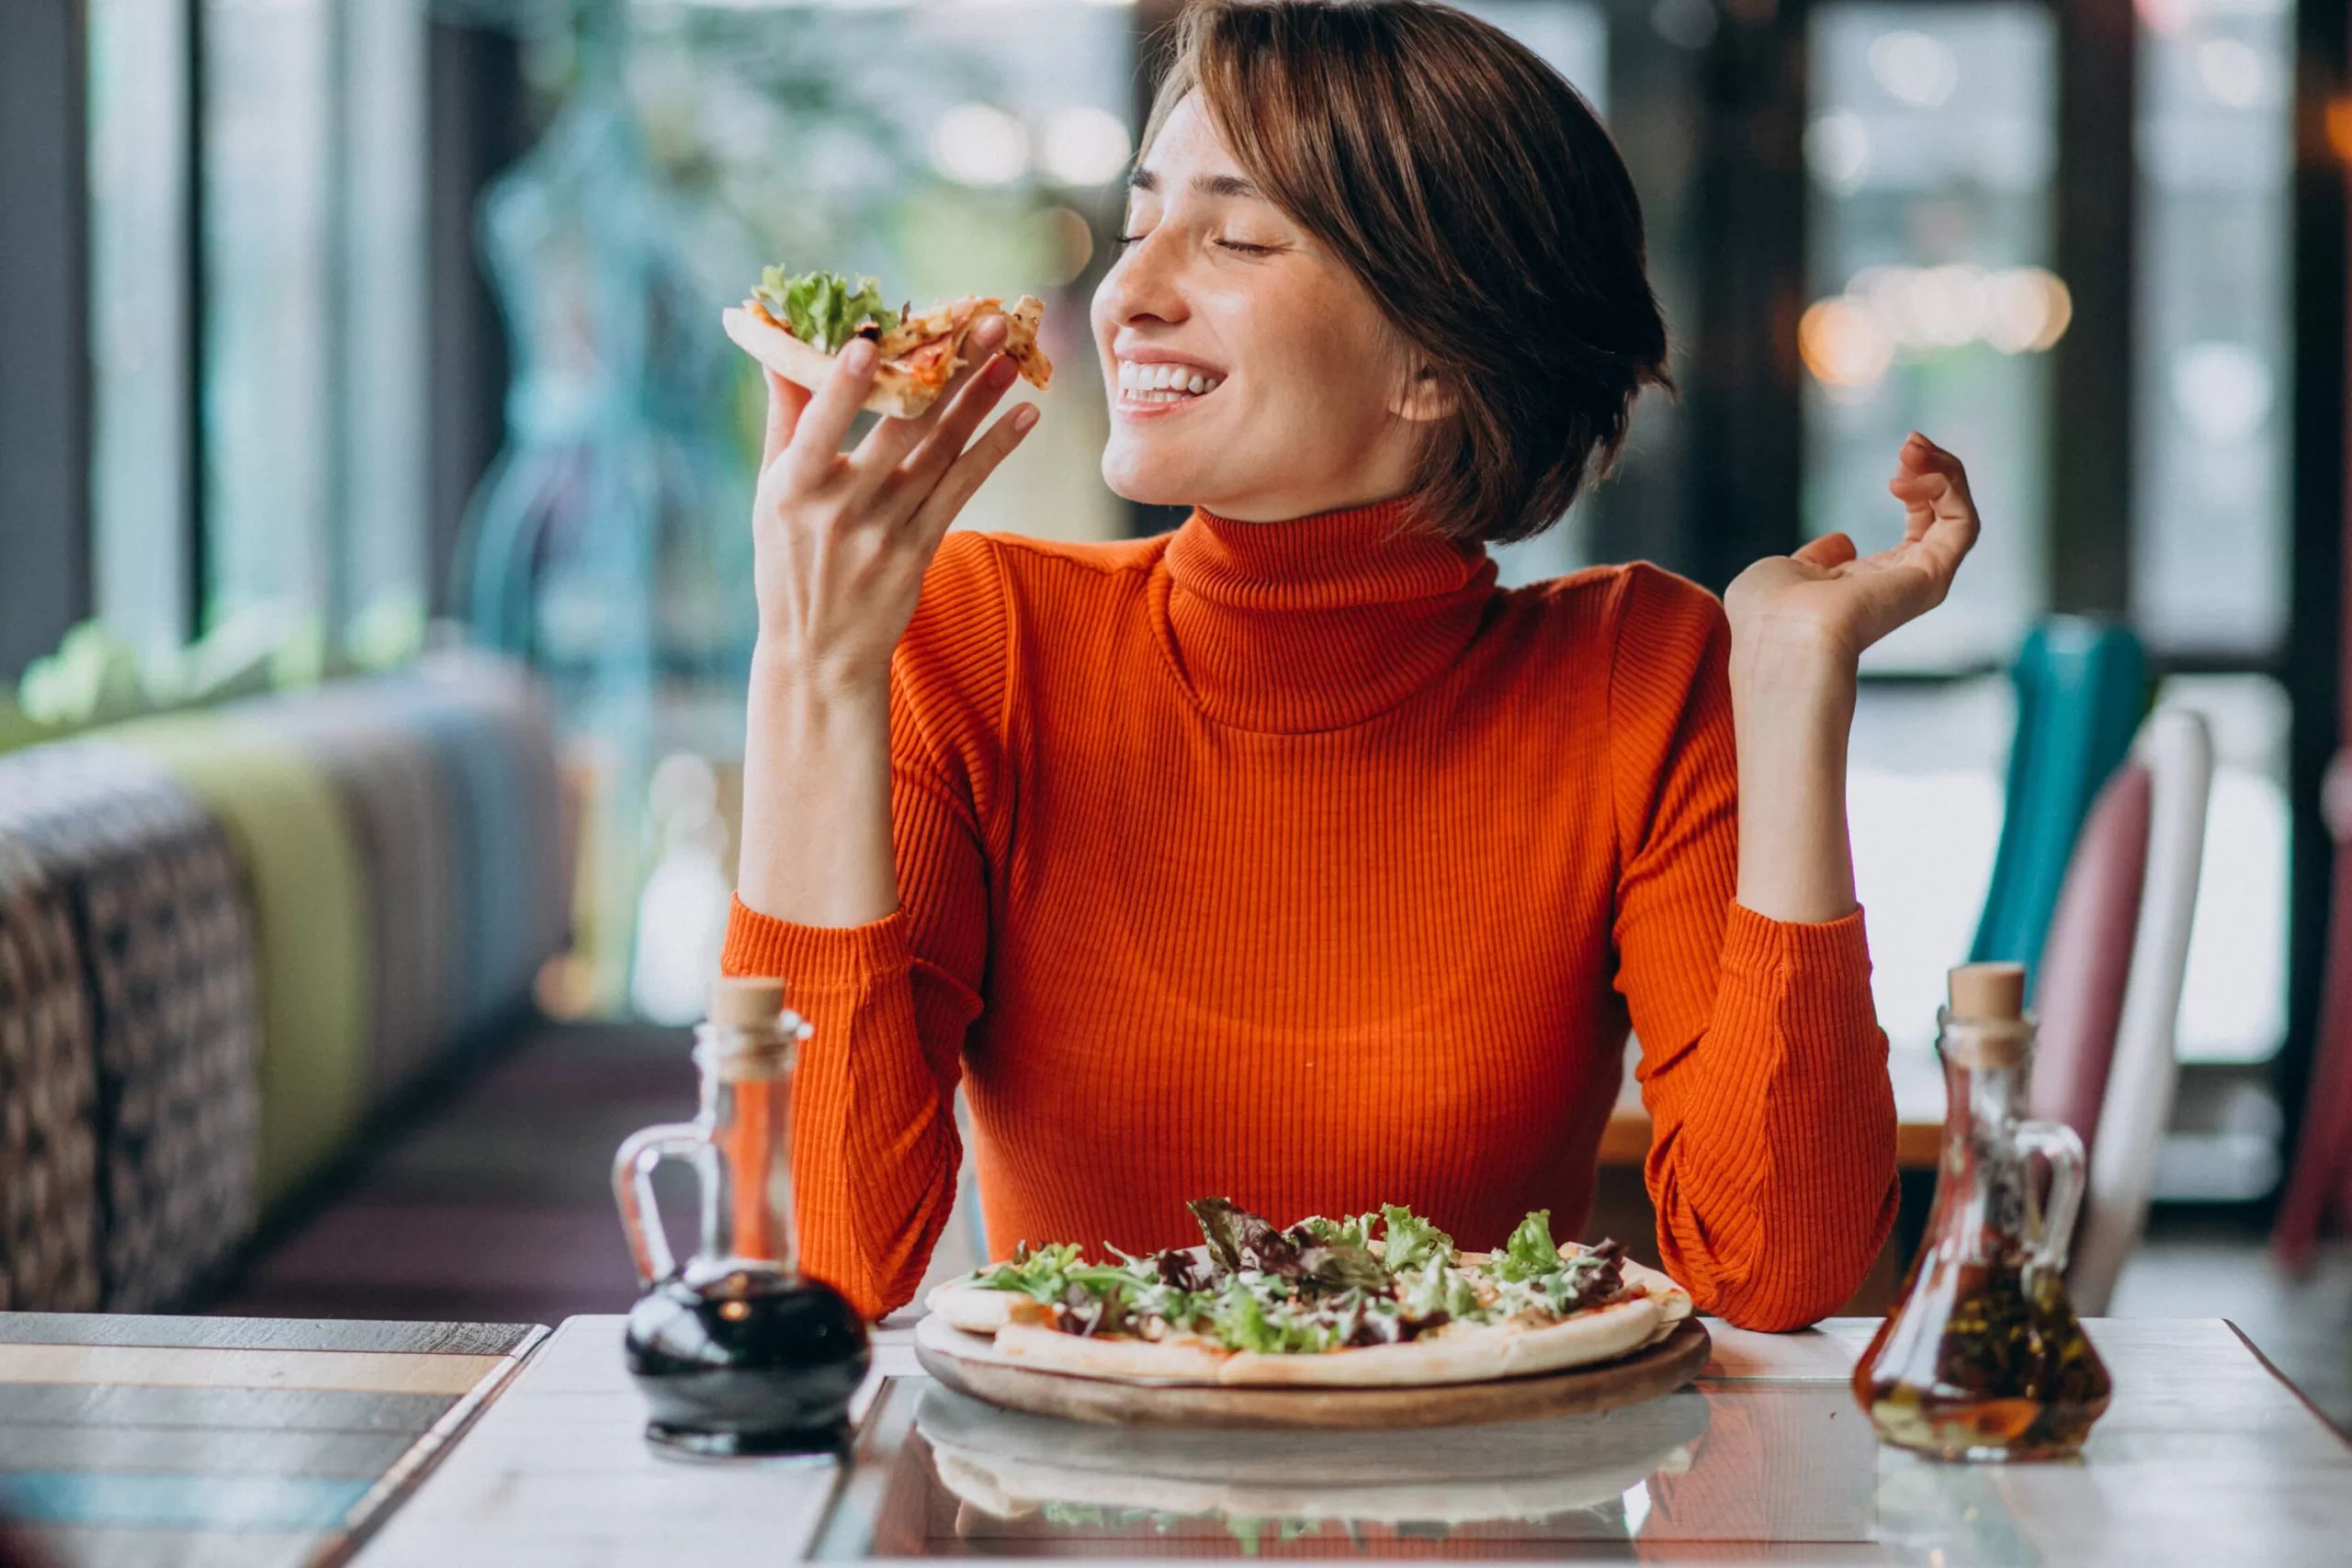 Nutrition: 5 keys to eating happily and not worrying about trying
